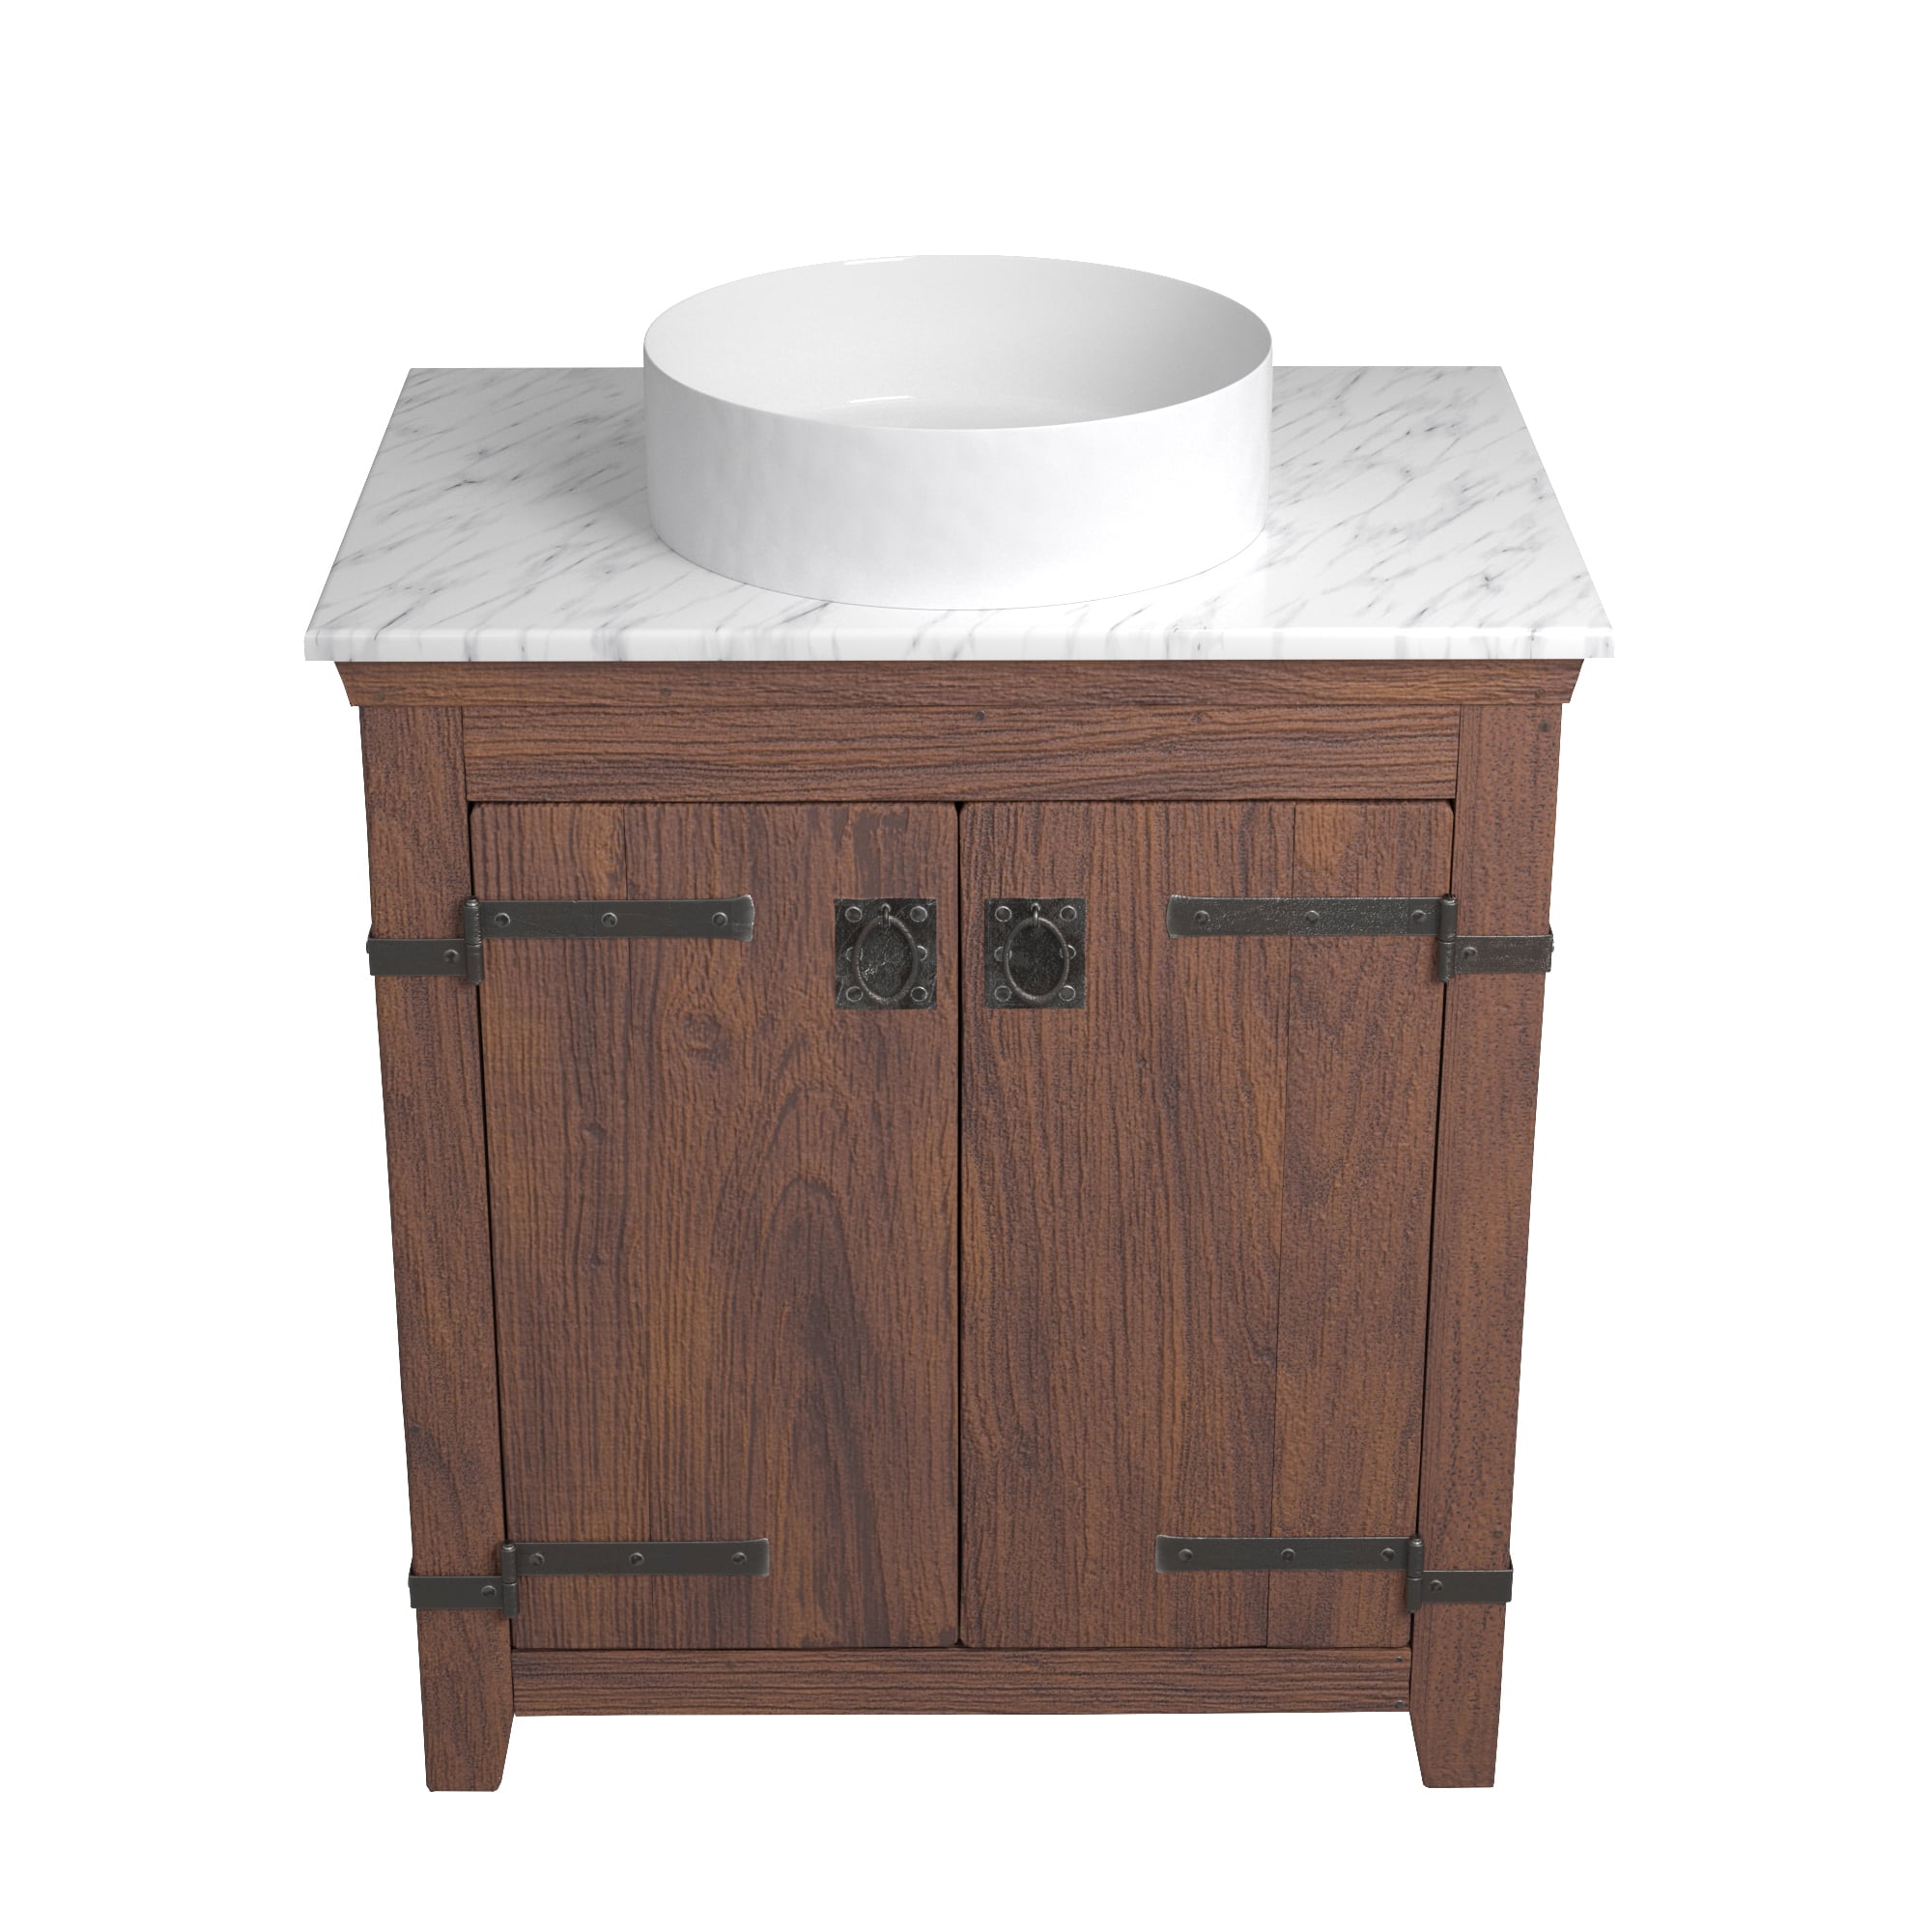 Native Trails 30" Americana Vanity in Chestnut with Carrara Marble Top and Positano in Bianco, Single Faucet Hole, BND30-VB-CT-MG-051